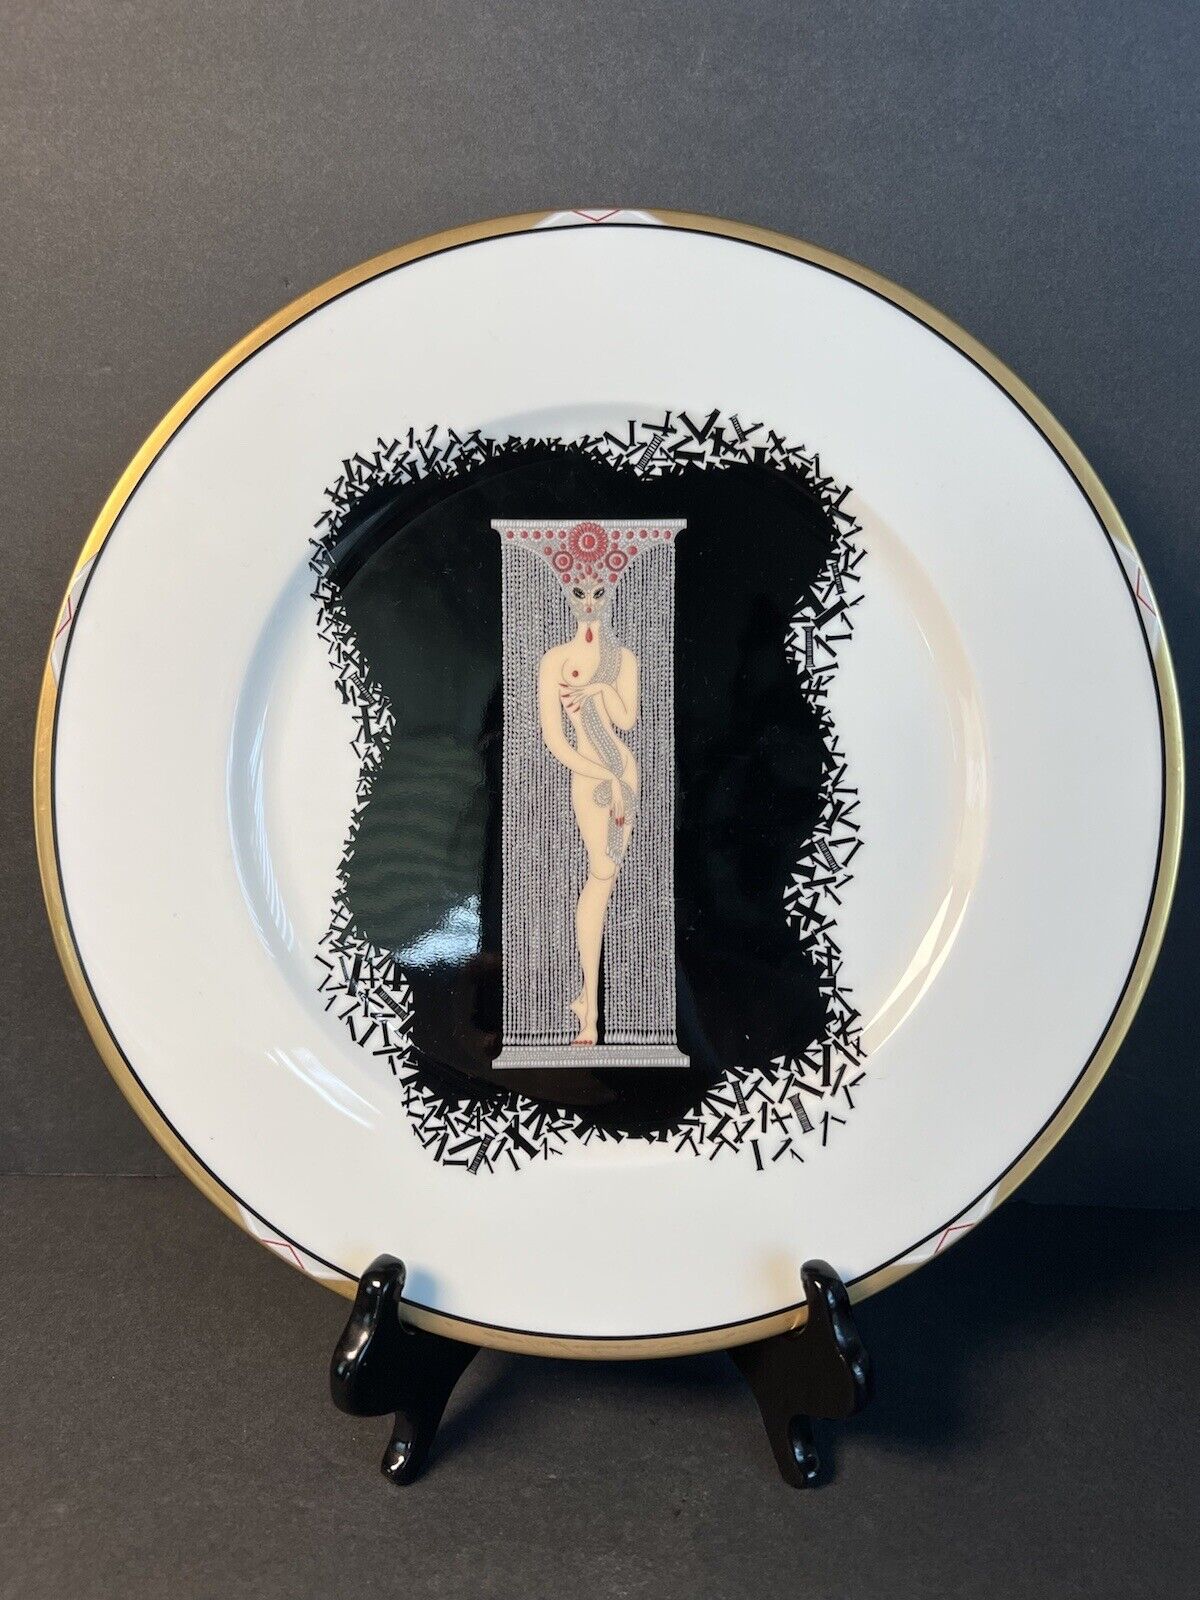 MIKASA ERTE BONE CHINA CHARGER, THE NUMERALS 1 Plate A3201/1987 Japan